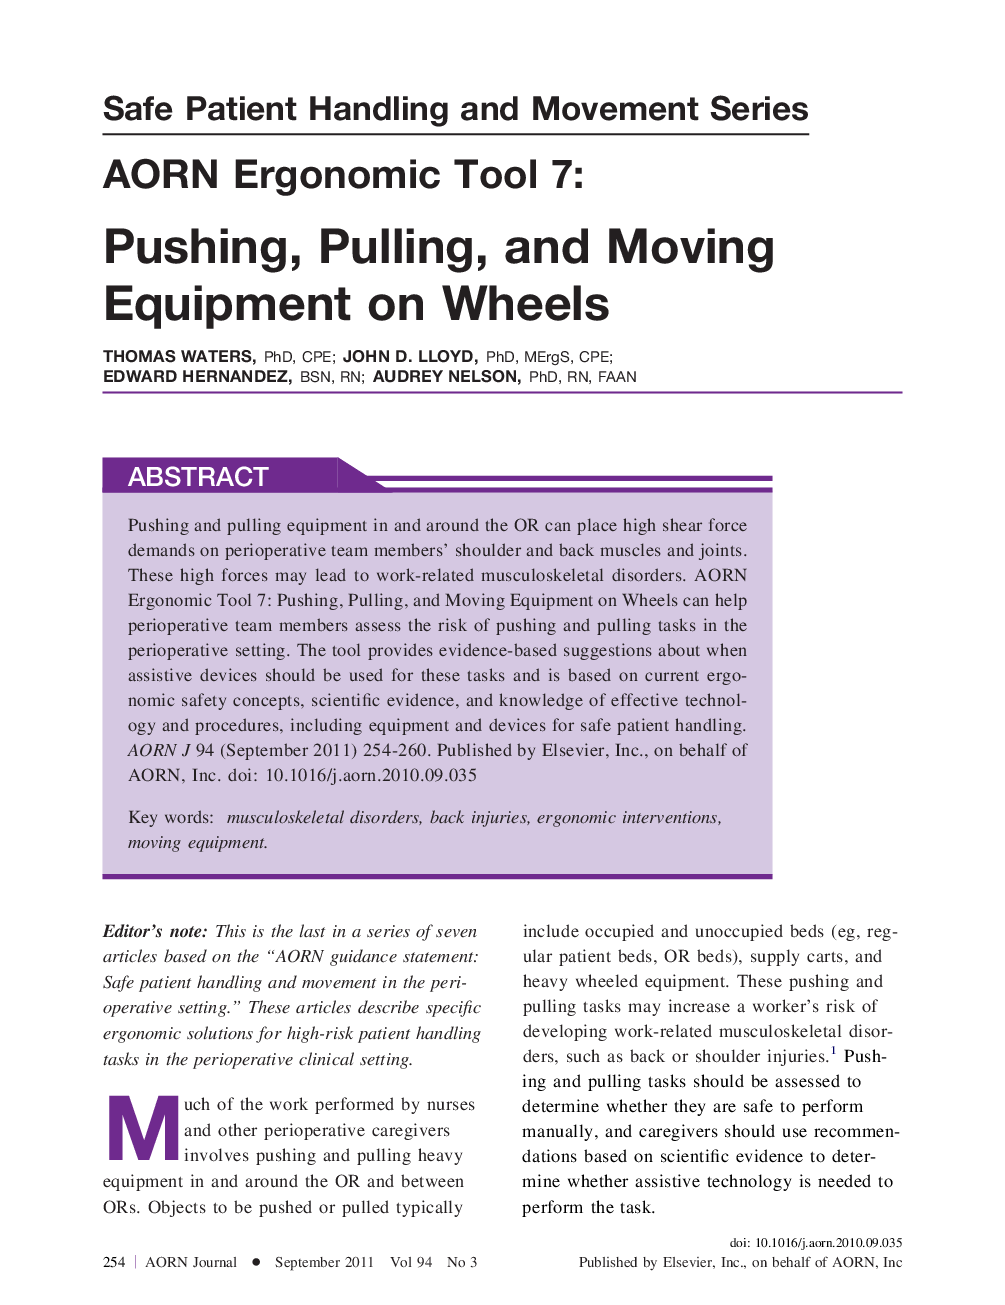 AORN Ergonomic Tool 7: Pushing, Pulling, and Moving Equipment on Wheels